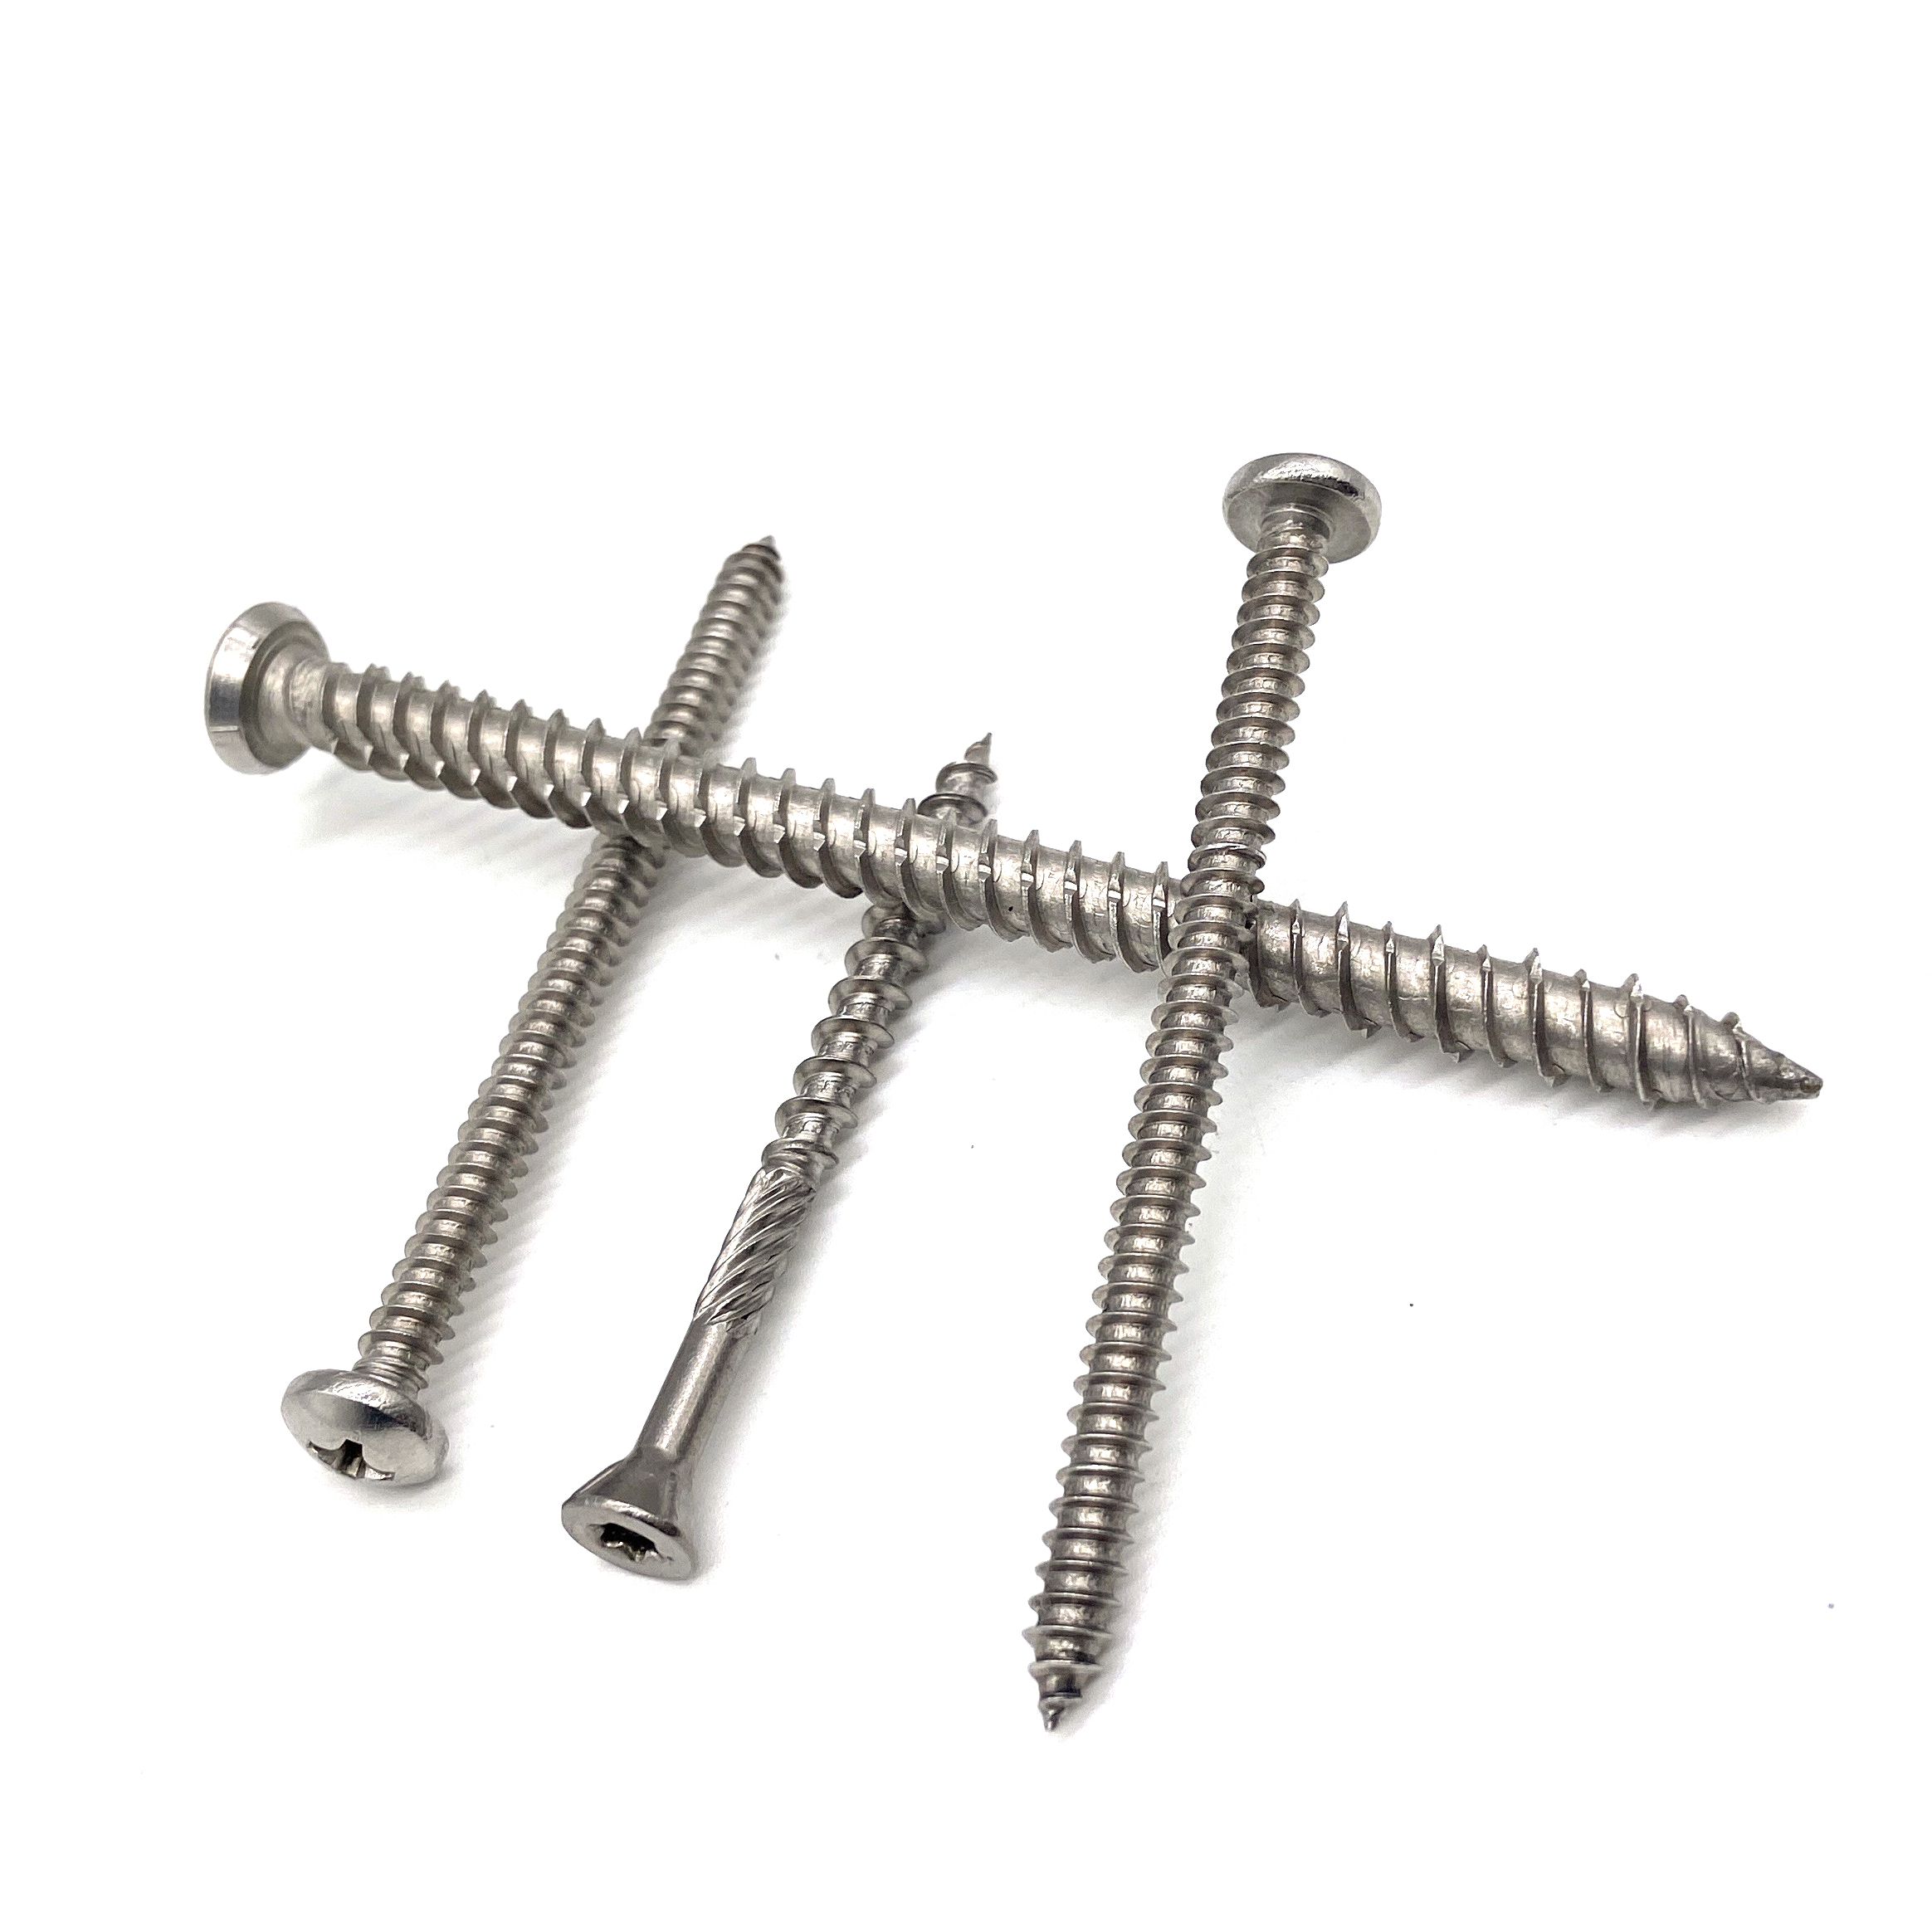 Astm A574 M5 Cross Flat Head Deck 316 Stainless Steel Self Tapping Screw